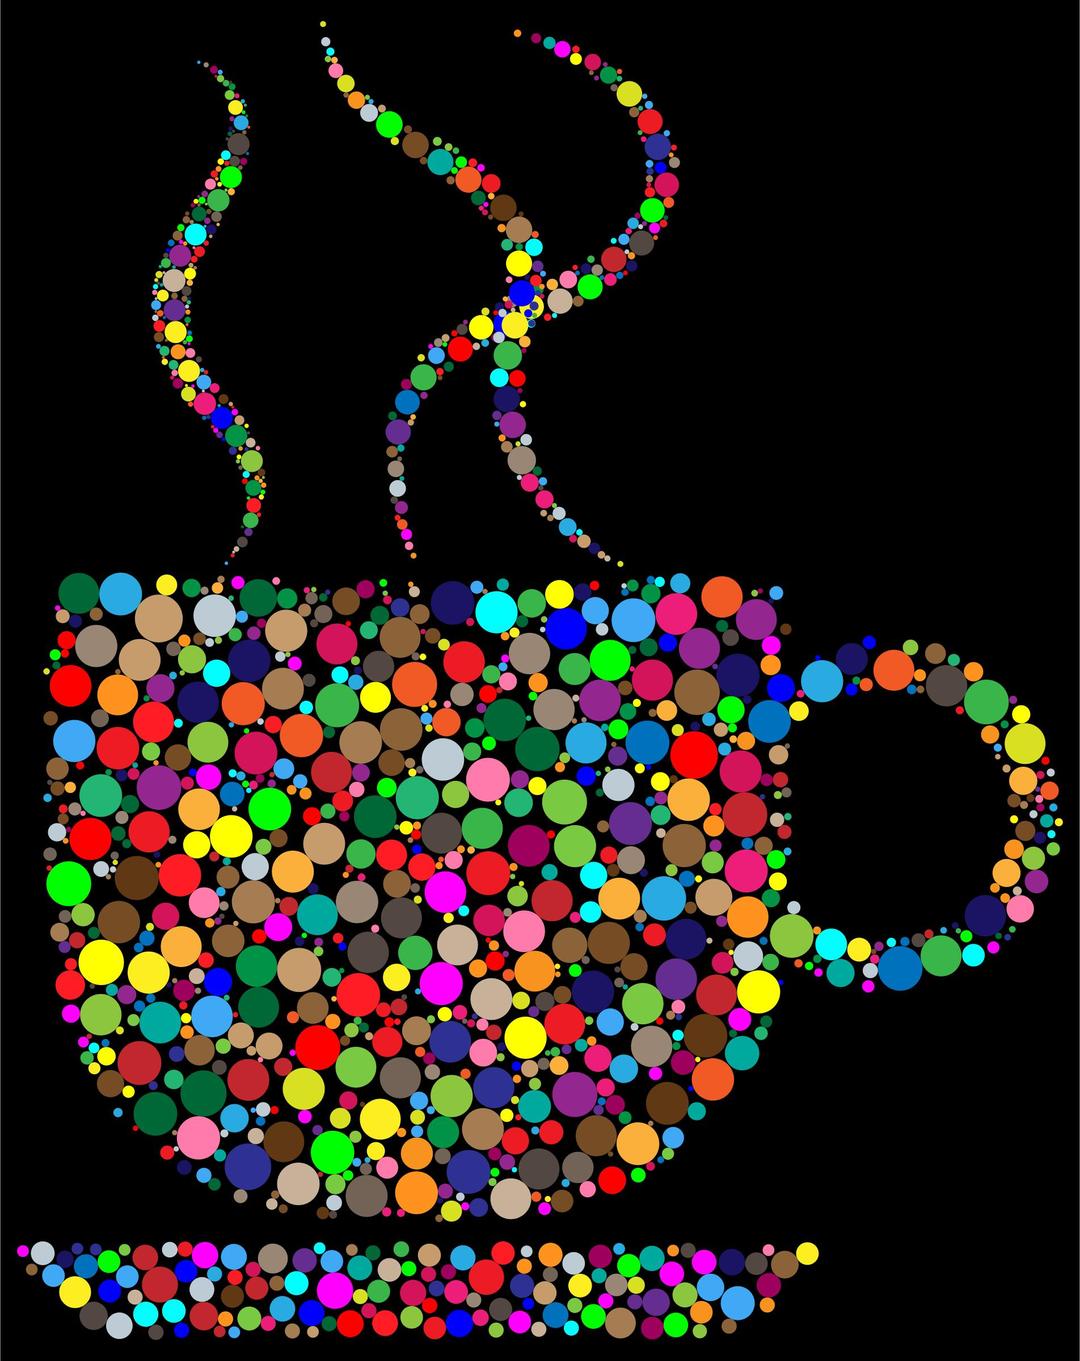 Colorful Coffee Circles With Black Background png transparent